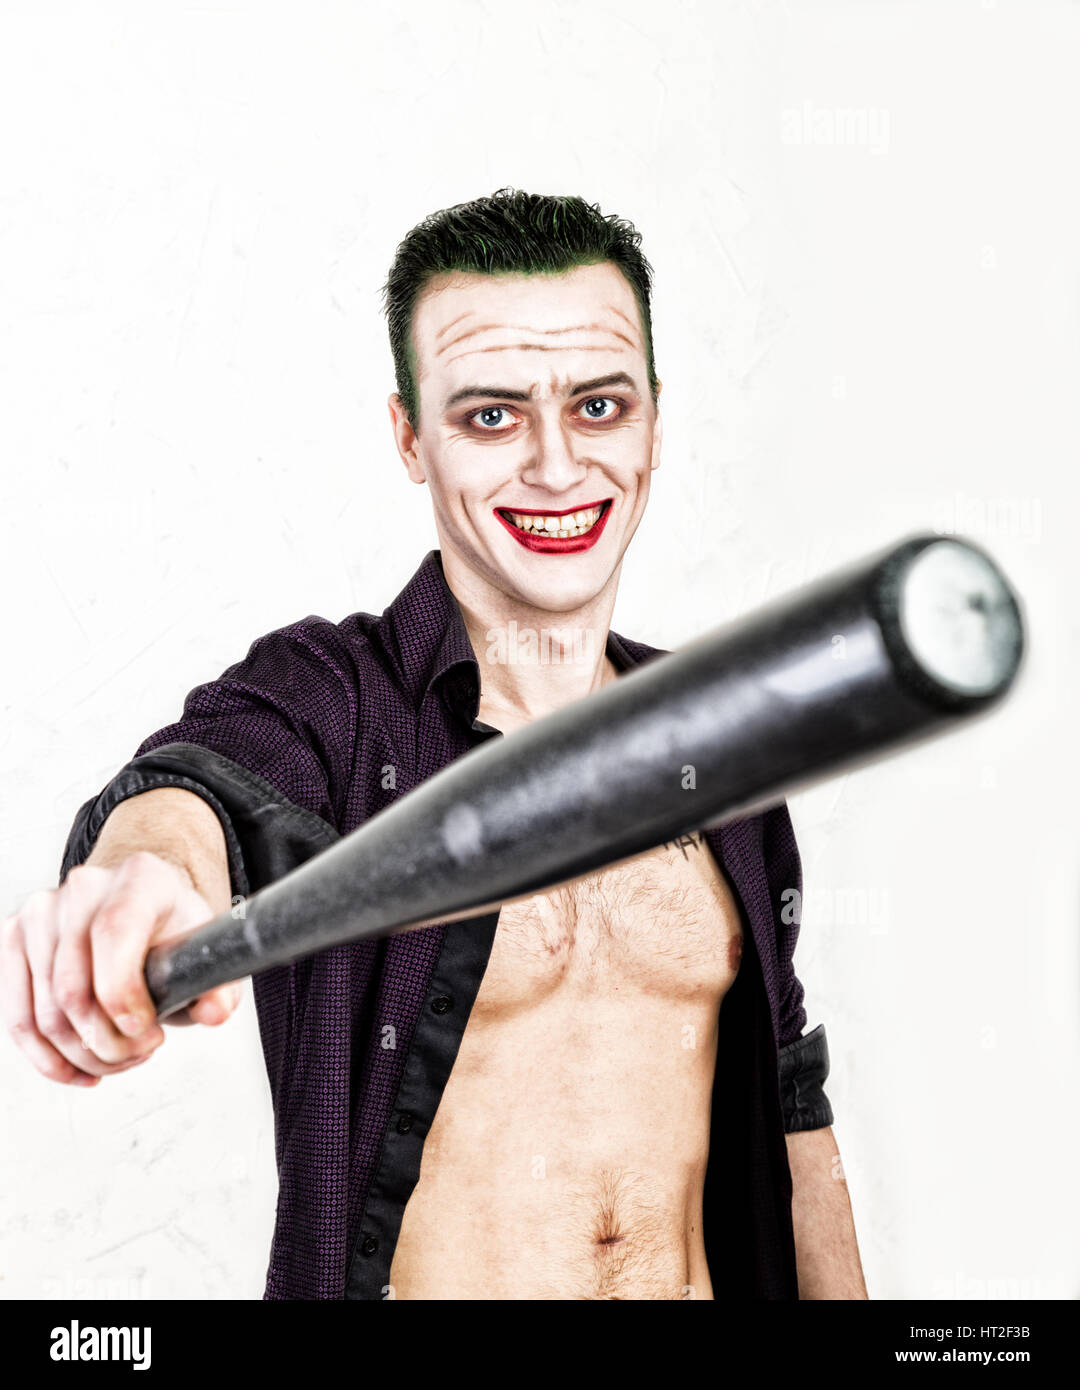 guy with crazy joker face holding baseball bat, green hair and idiotic smike. carnaval costume. Stock Photo